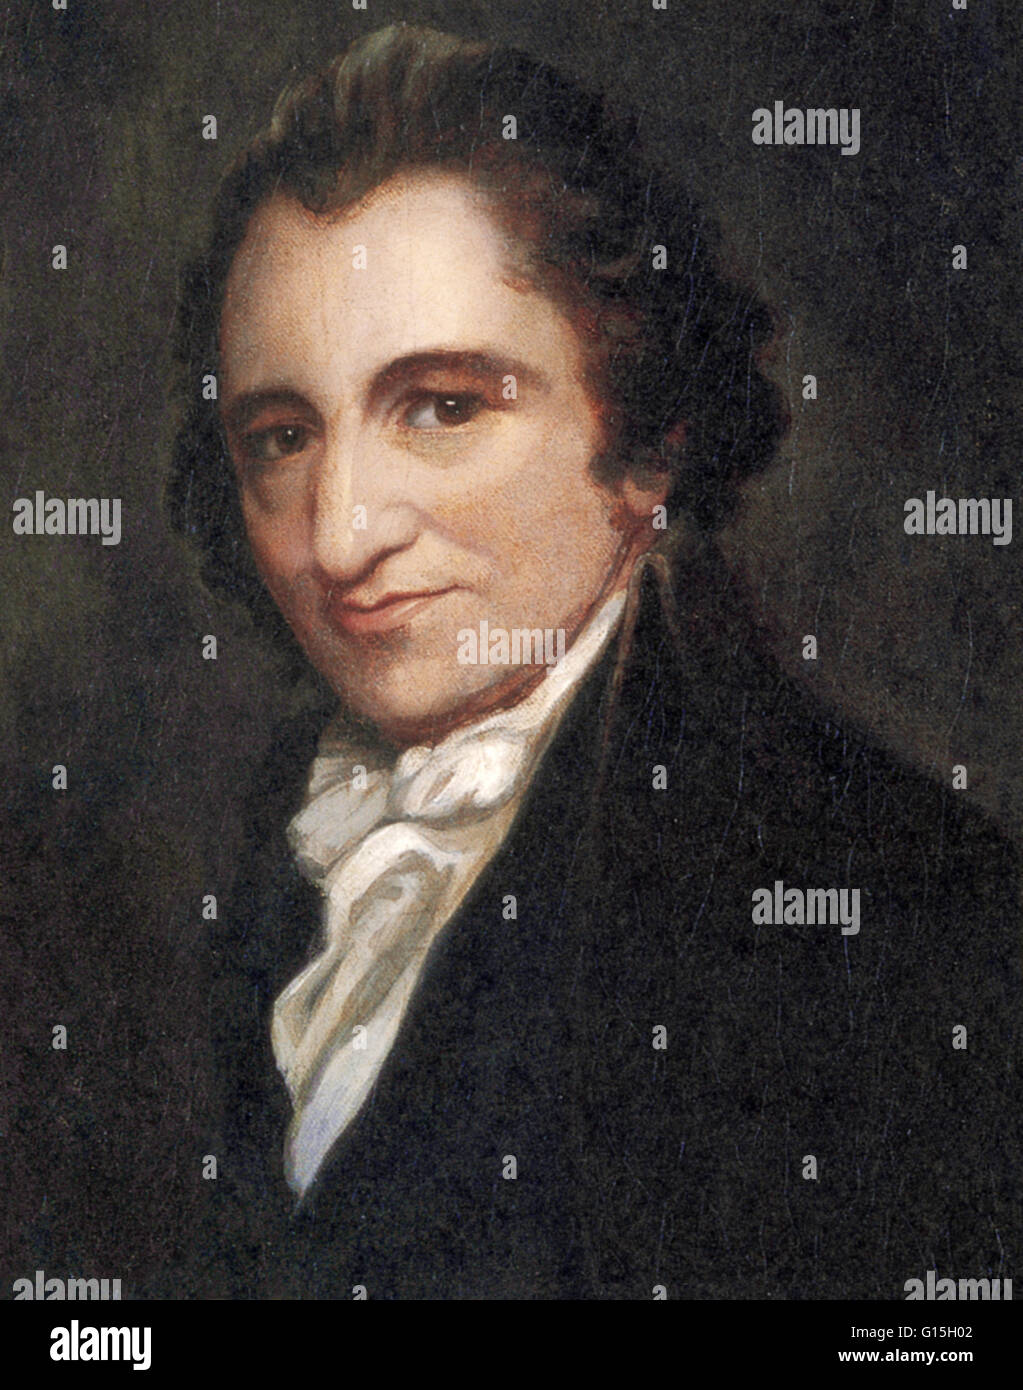 Thomas Paine (February 9, 1737 - June 8, 1809) was an American political activist, philosopher, political theorist, revolutionary and one of the Founding Fathers of the United States. His pamphlet Common Sense inspired people to declare and fight for inde Stock Photo